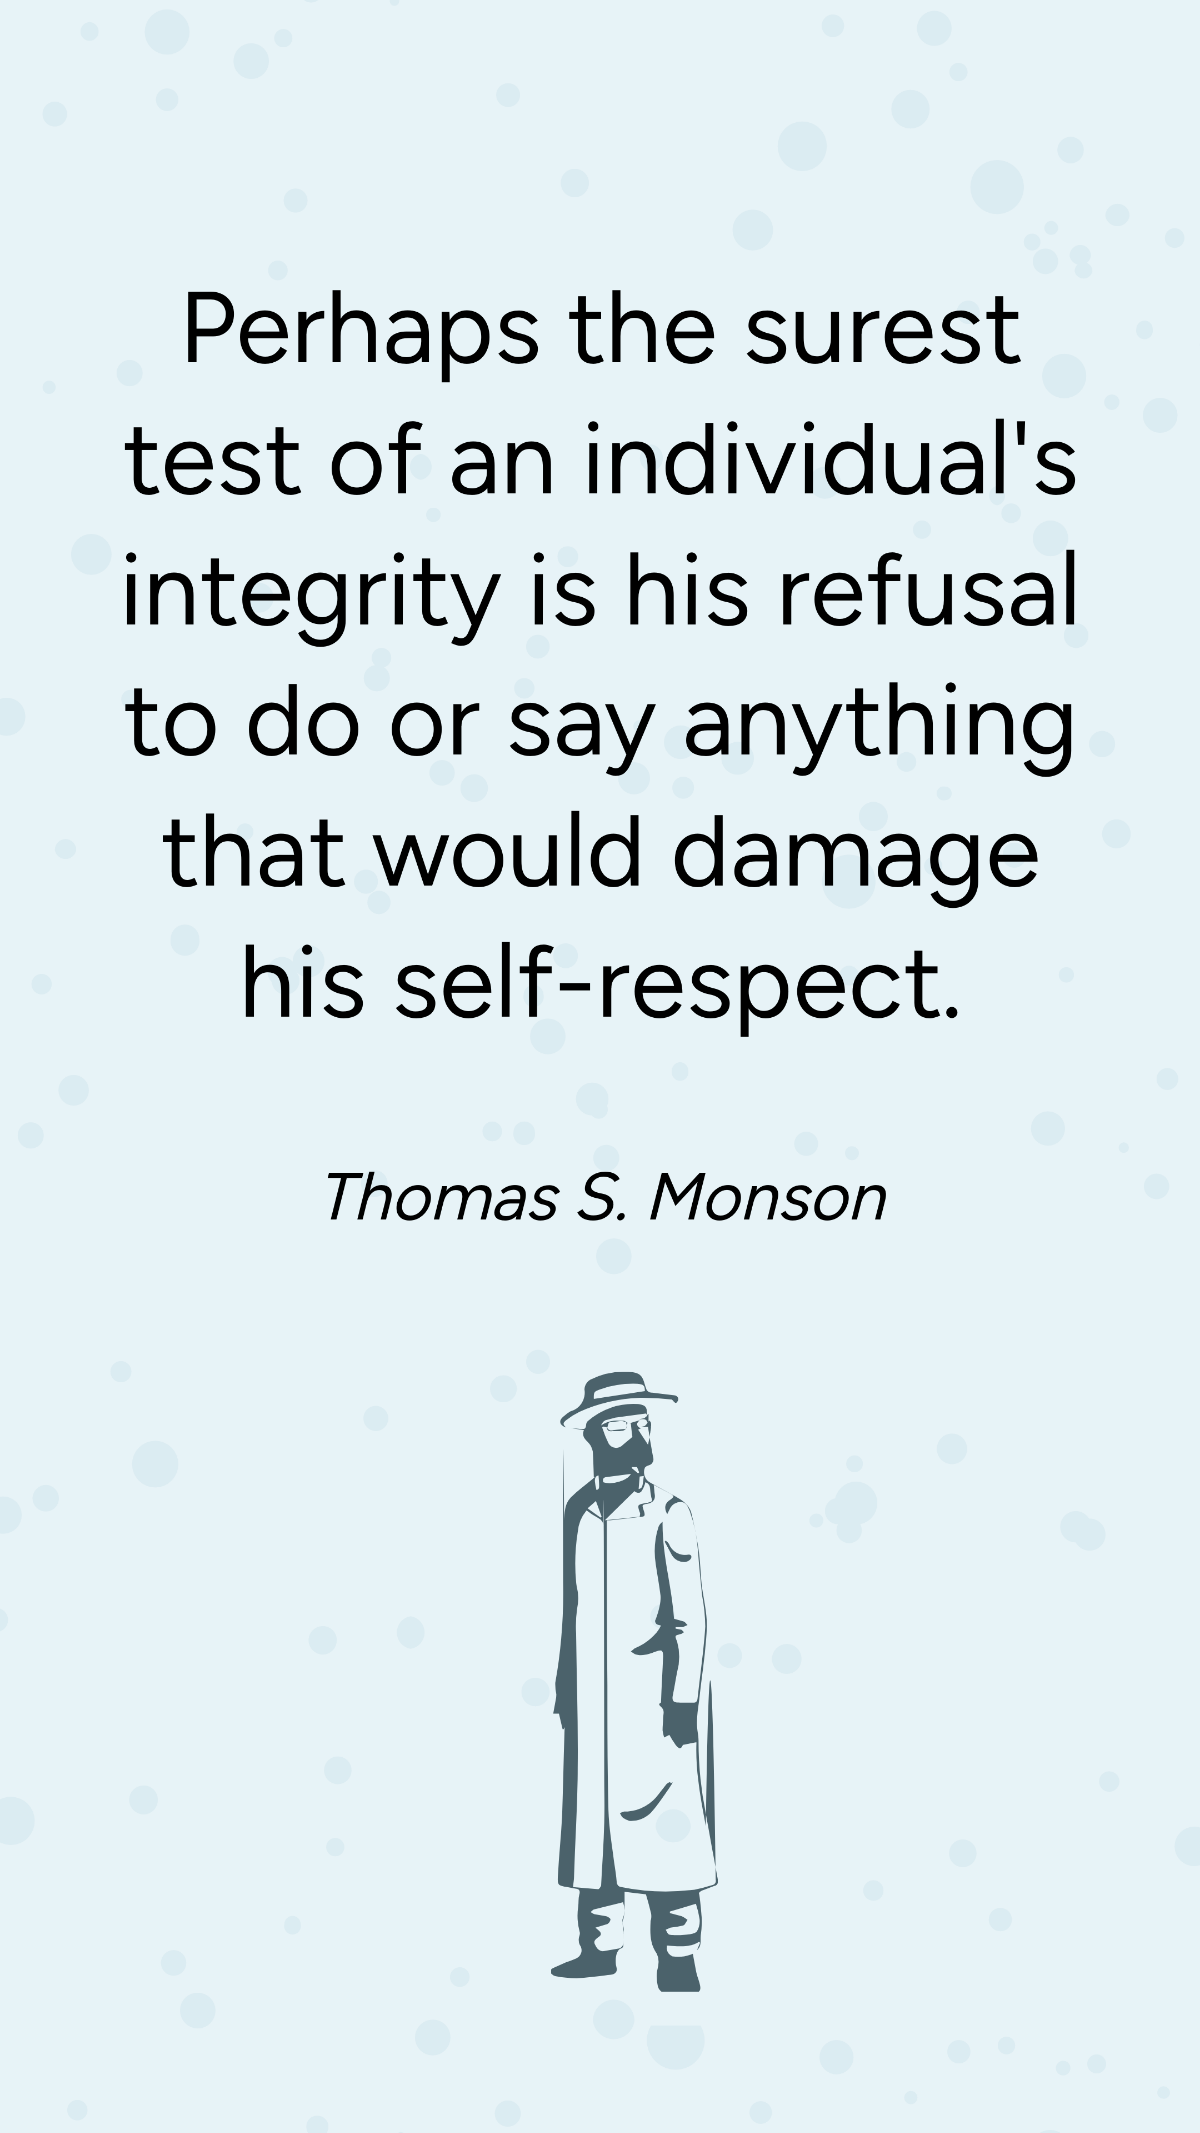 Thomas S. Monson - Perhaps the surest test of an individual's integrity is his refusal to do or say anything that would damage his self-respect. Template